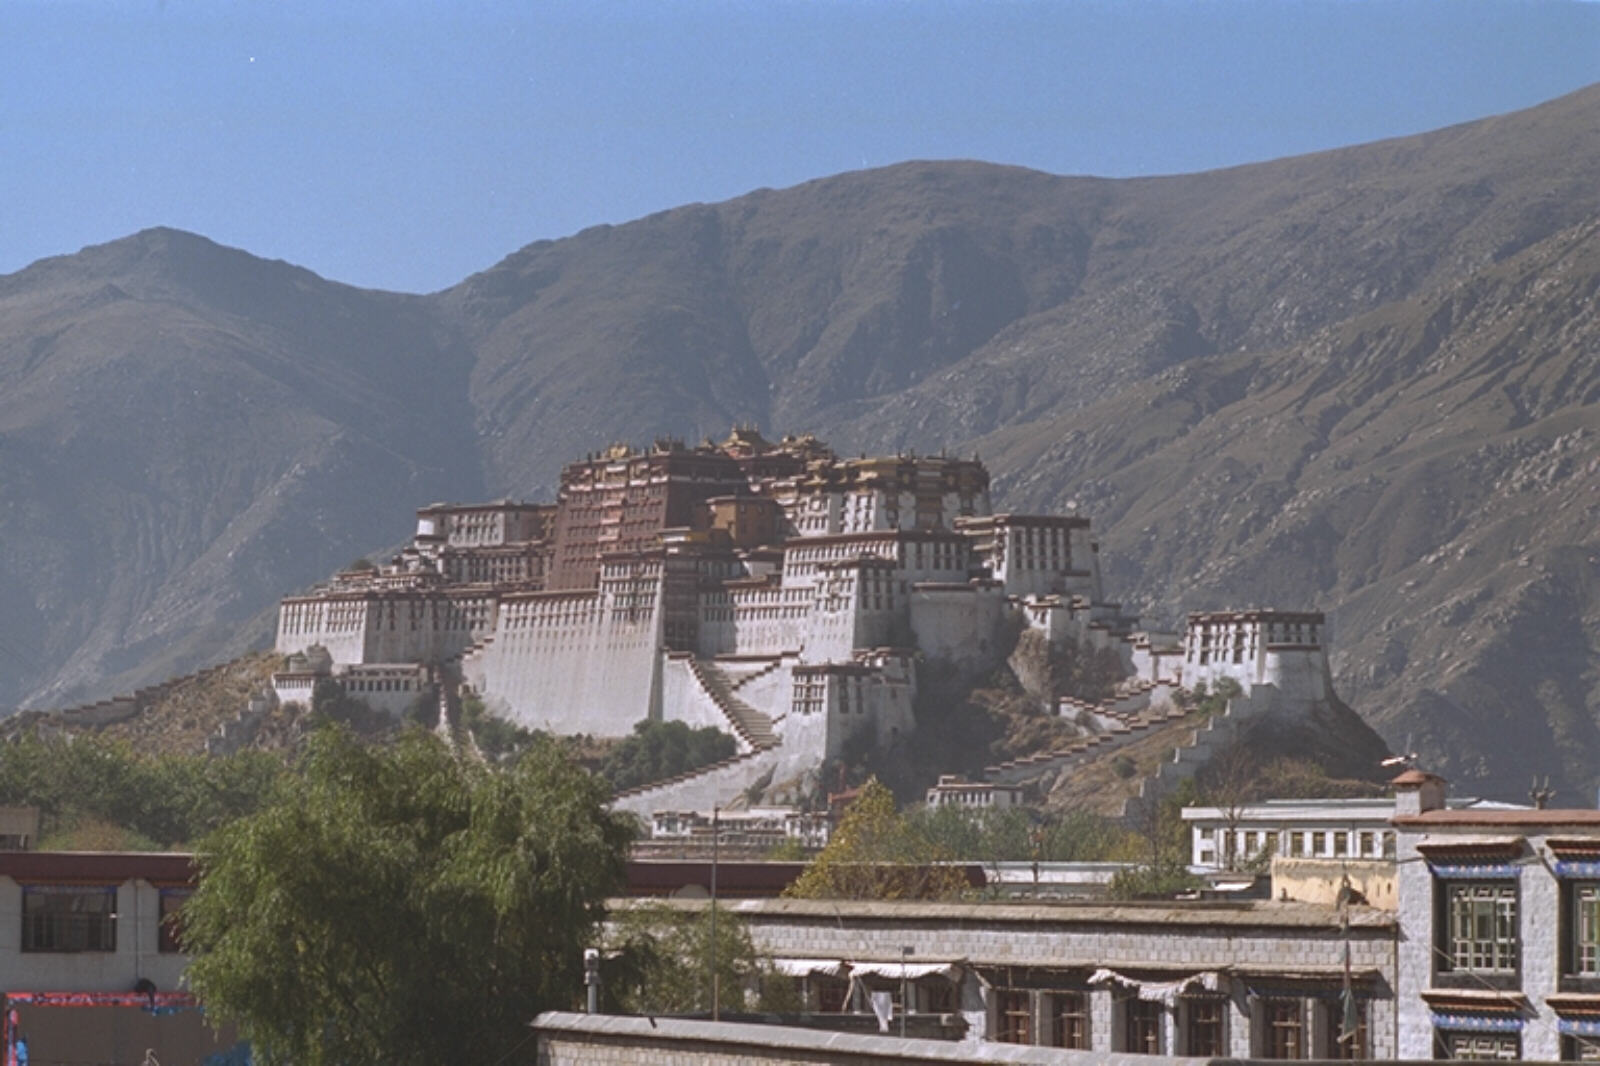 The Potala seen from the Jokhang in Lhasa Tibet